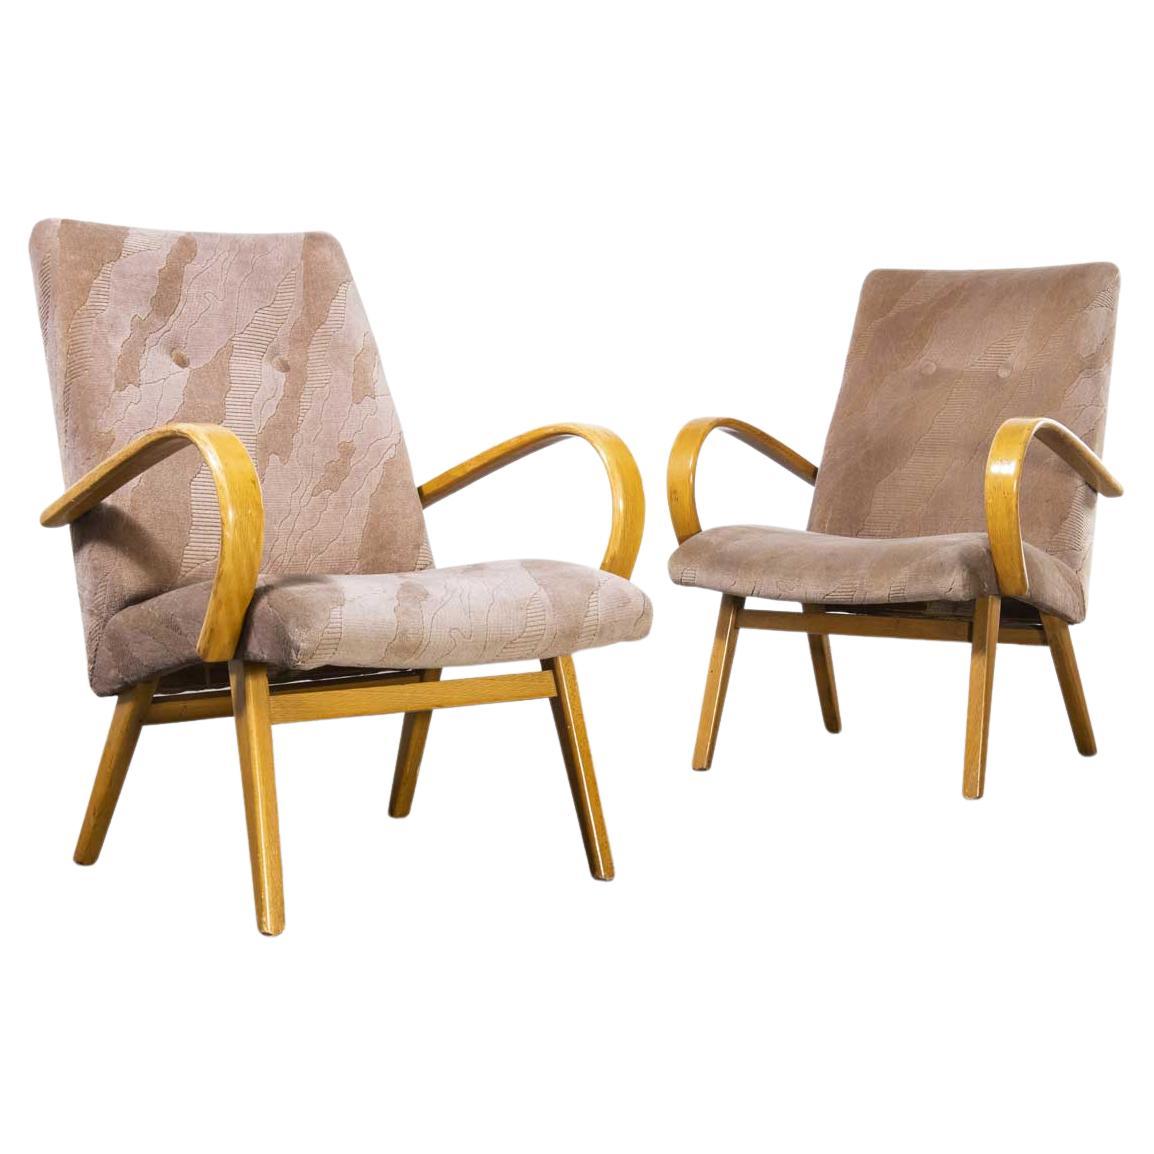 1960's Original Pair of Armchairs - Produced by Ton